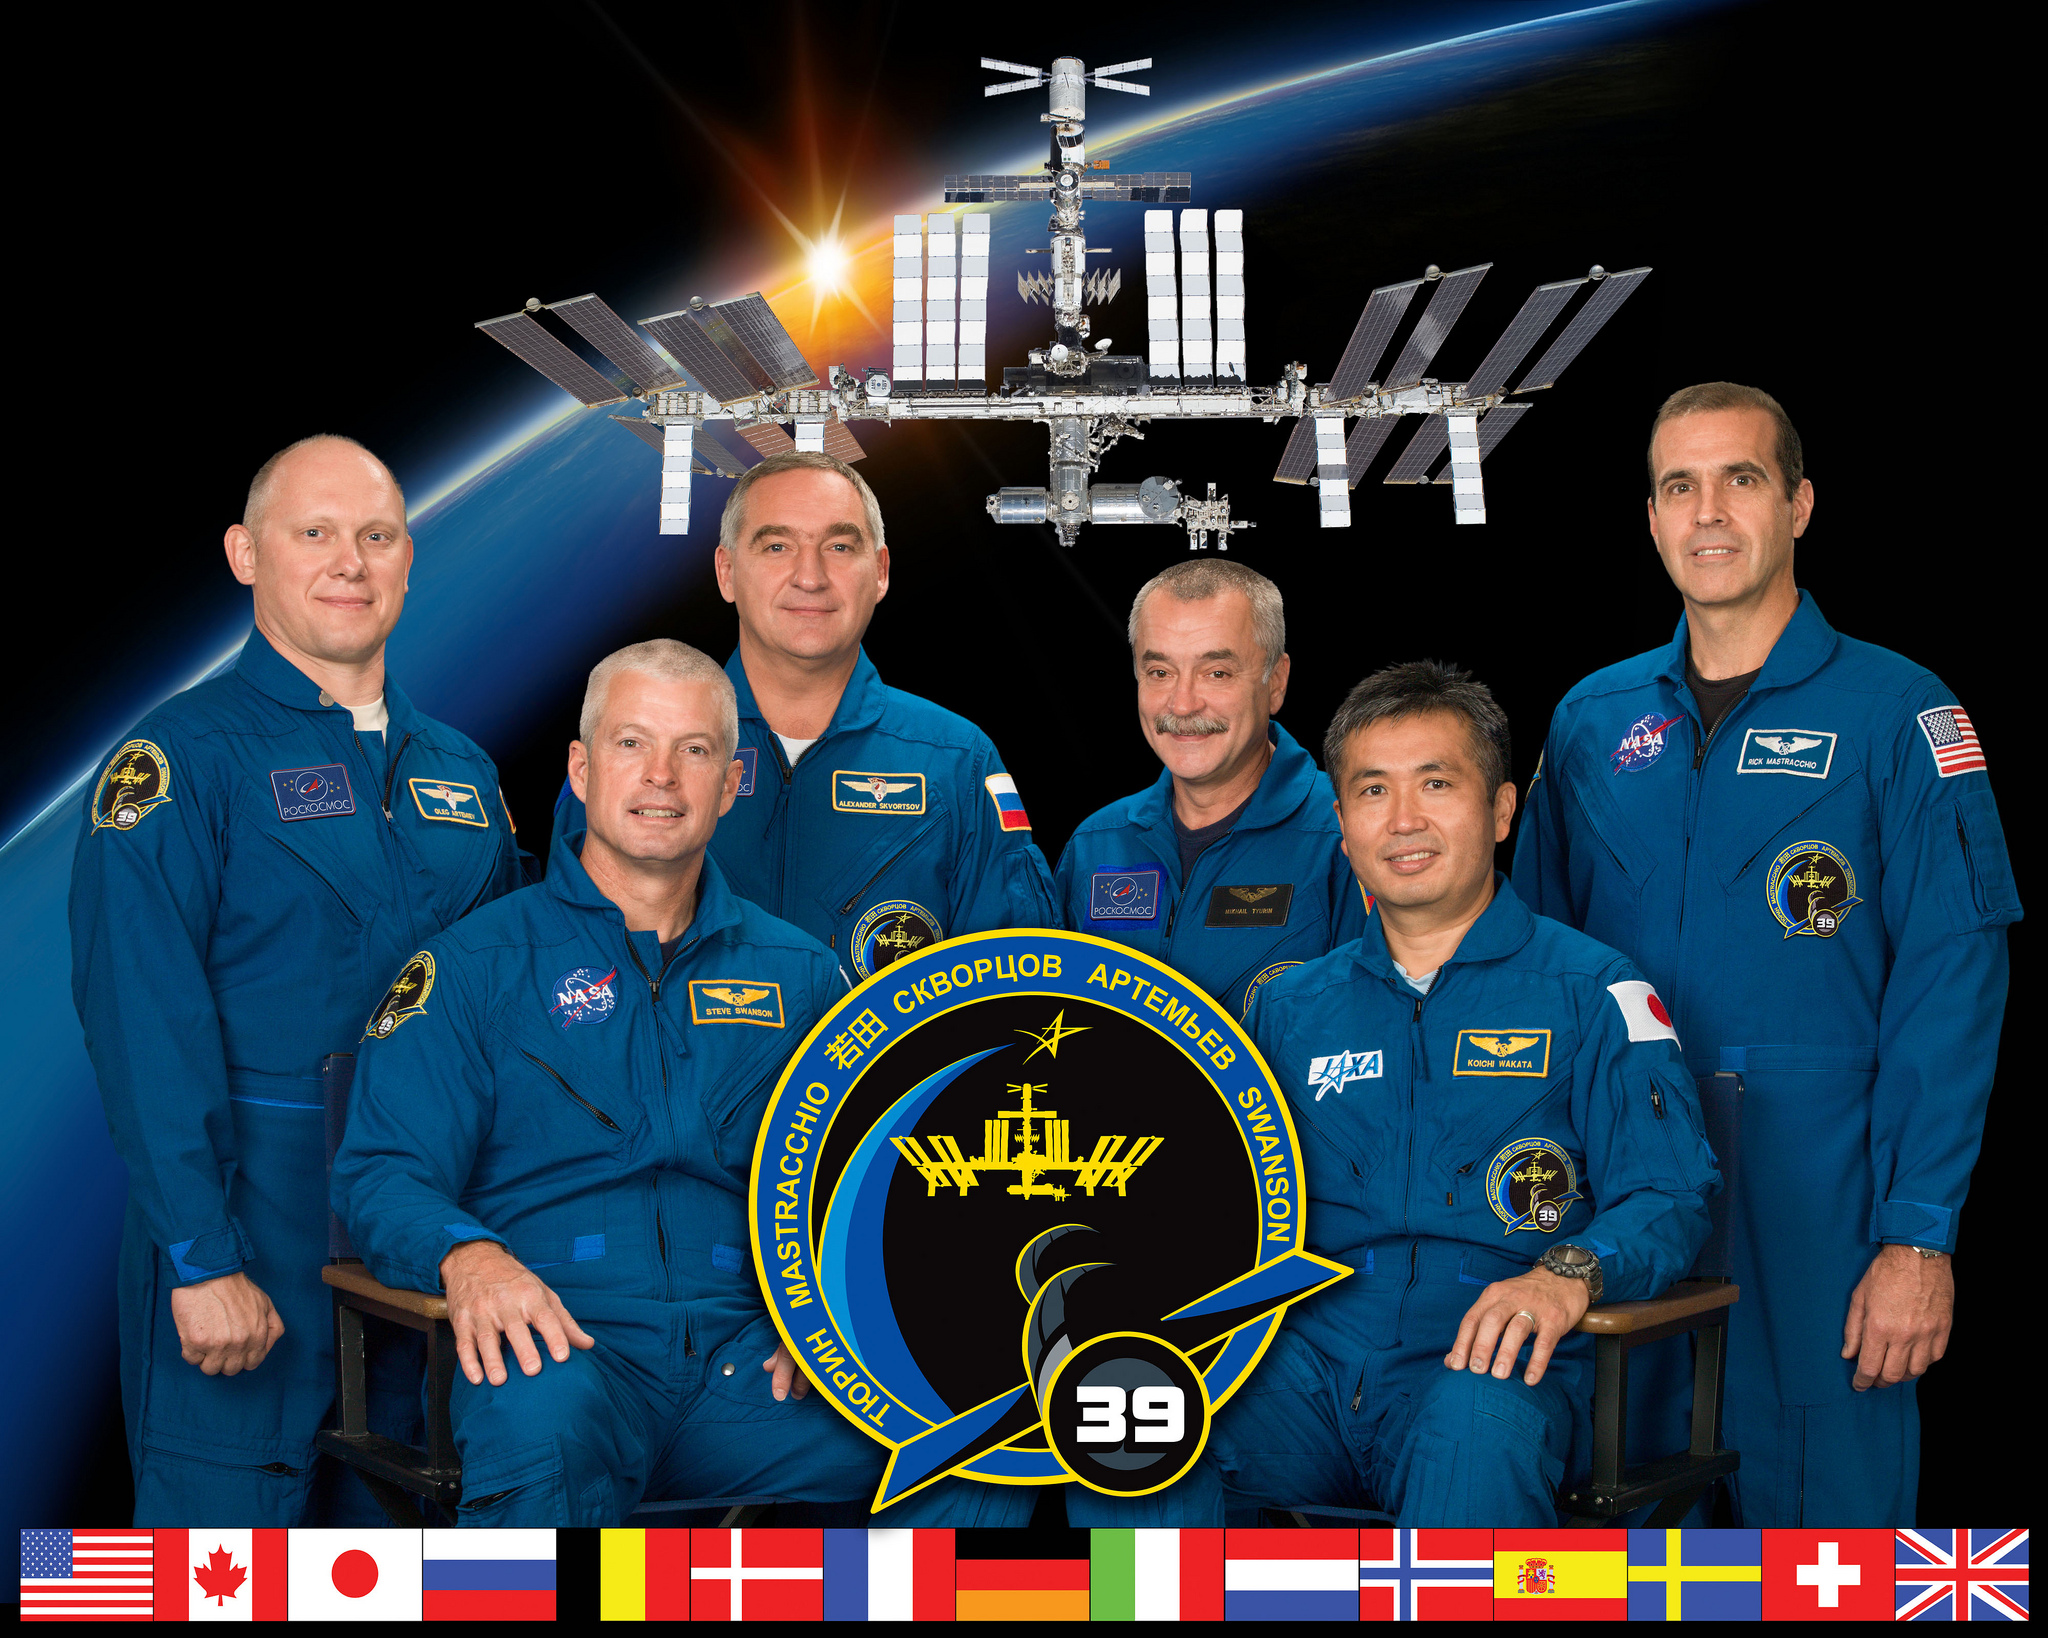 With the arrival of the Soyuz TMA-12M crew, Expedition 39 aboard the International Space Station (ISS) has expanded to six members. Seated are Swanson (left) and Commander Koichi Wakata, with flight engineers Oleg Artemyev, Aleksandr Skvortsov, Mikhail Tyurin and Rick Mastracchio standing. Photo Credit: NASA